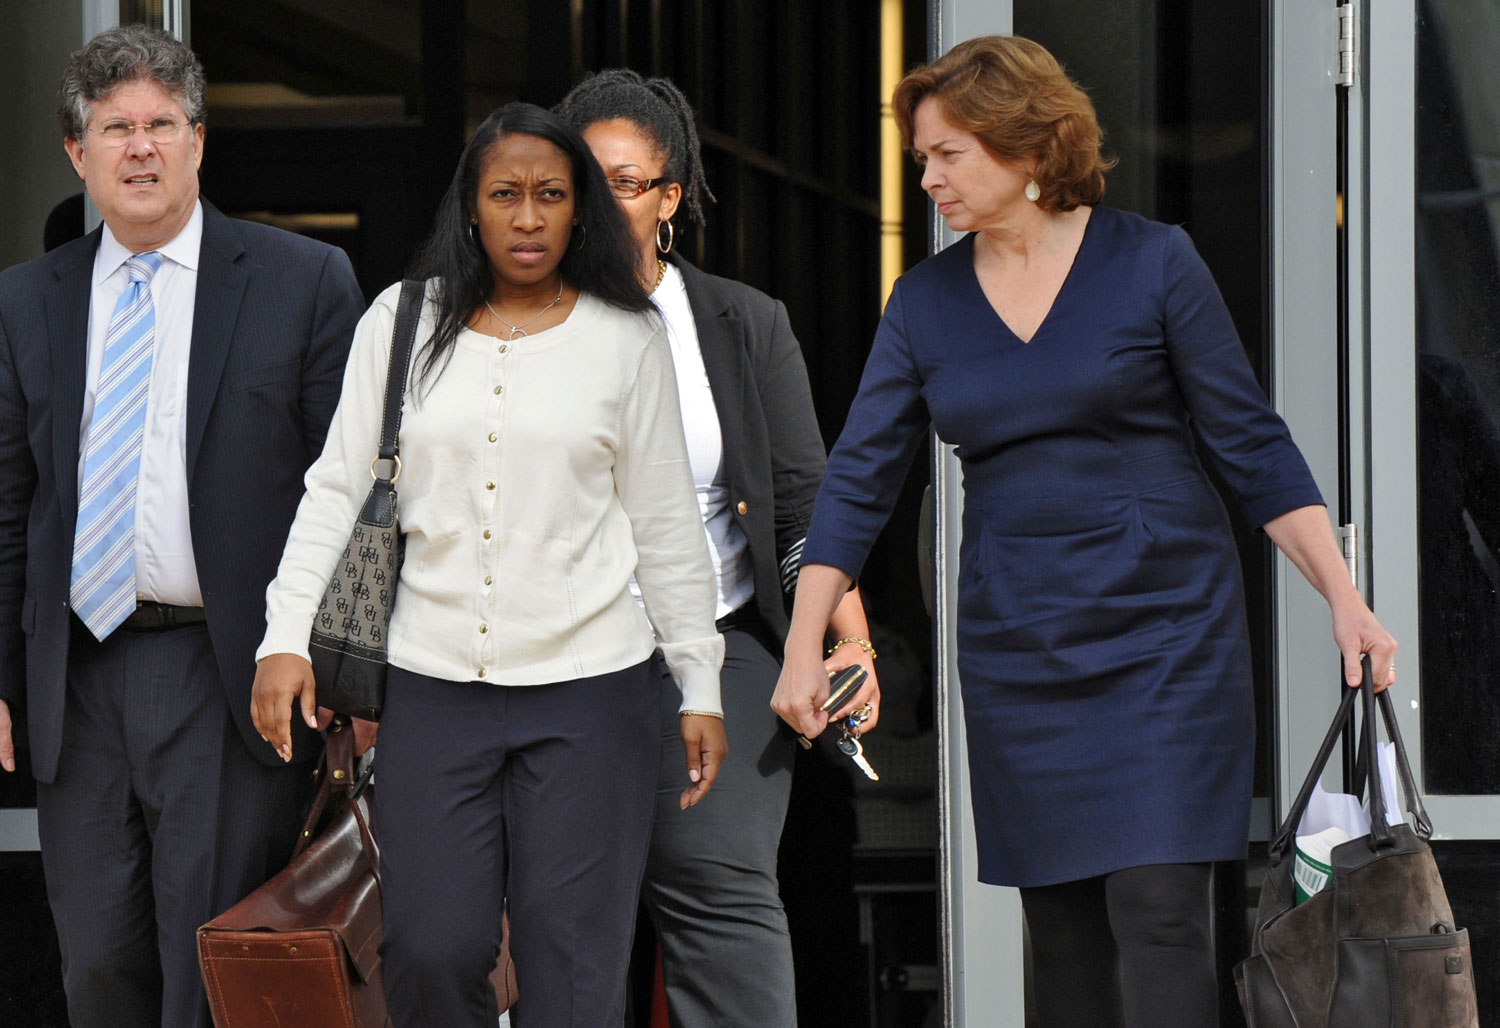 Marissa Alexander Now Faces 60 Years in Prison for Firing a Warning Shot in Self Defense